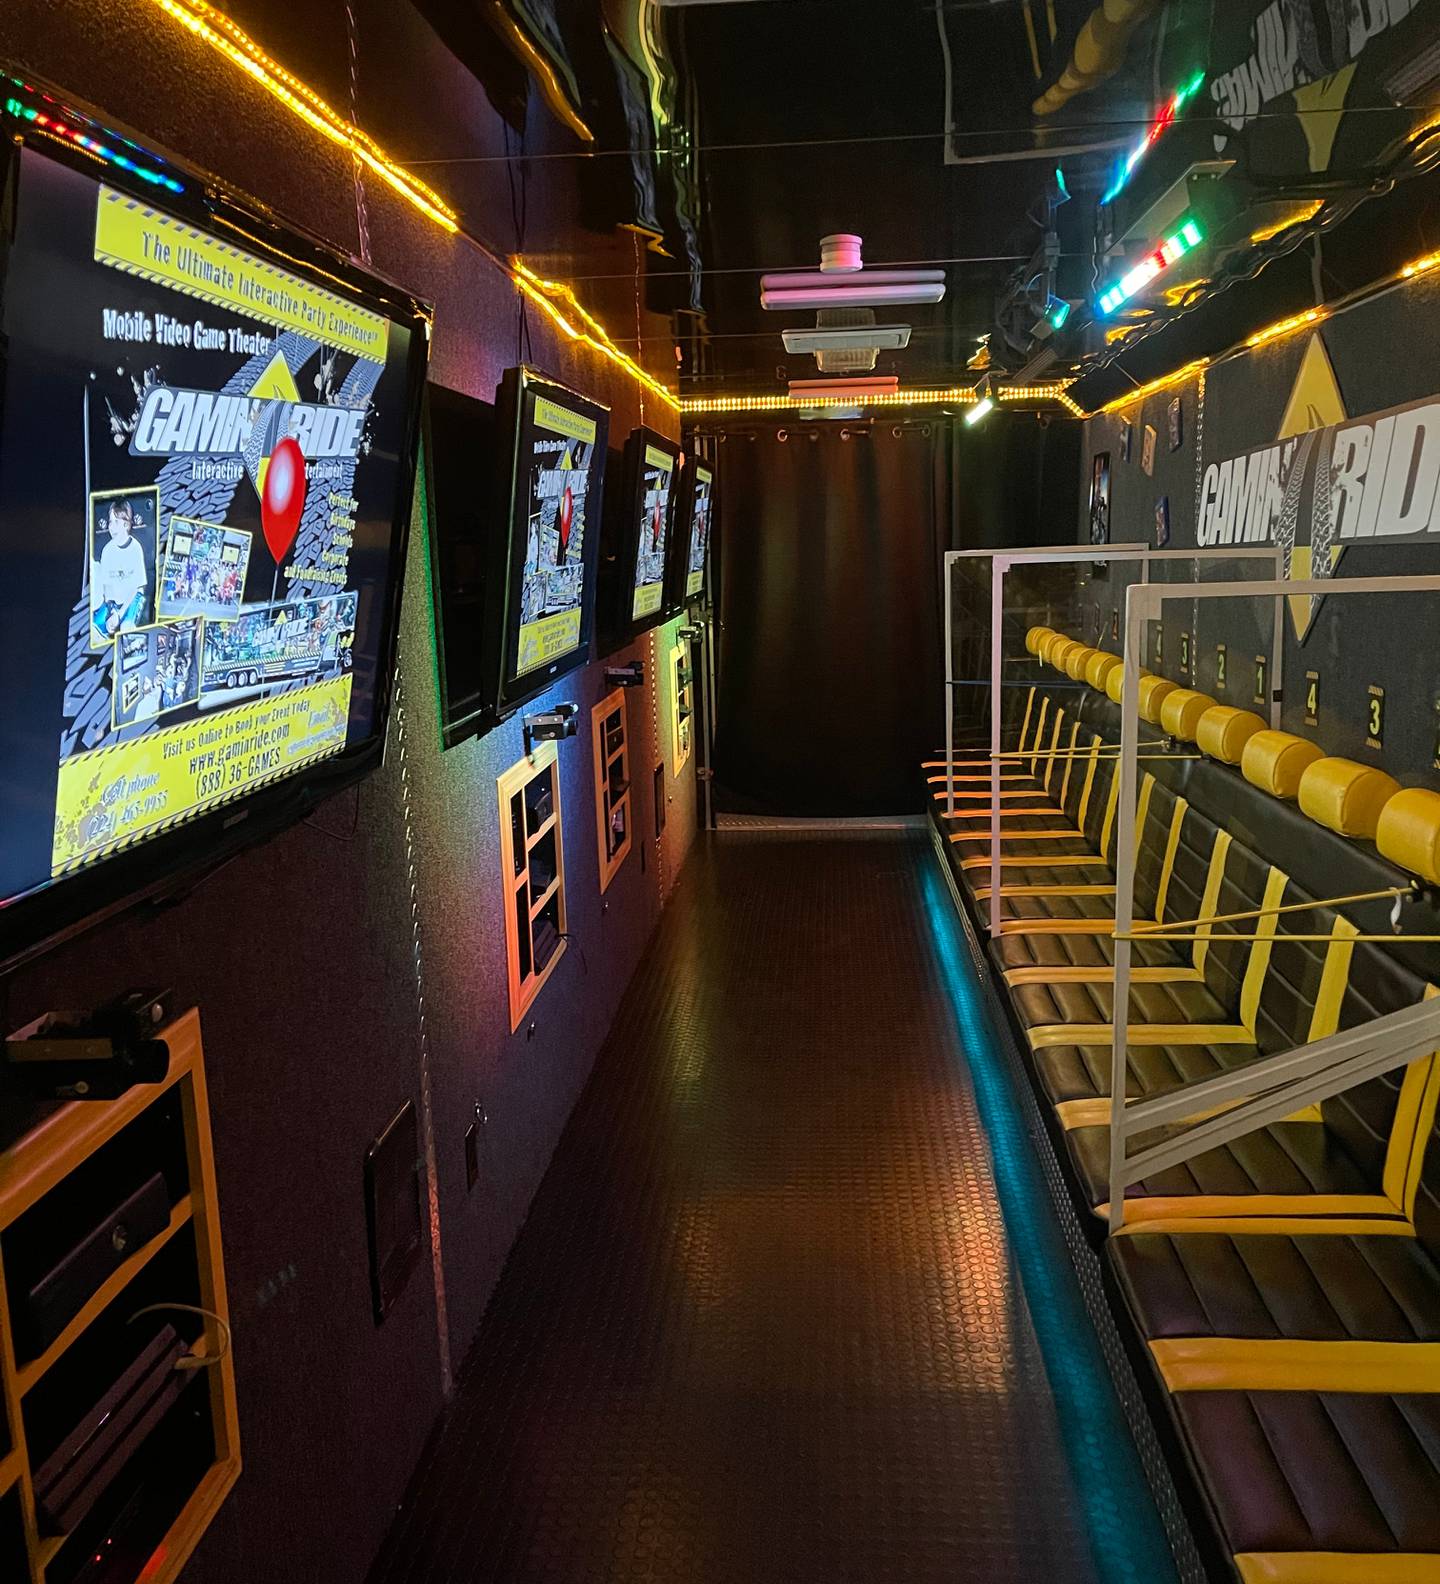 The Gamin' Ride mobile video game party trailer is outfitted with a multitude of video game consoles, televisions and virtual reality technology, and has performed strongly in recent months as vaccination rates against COVID-19 increased.